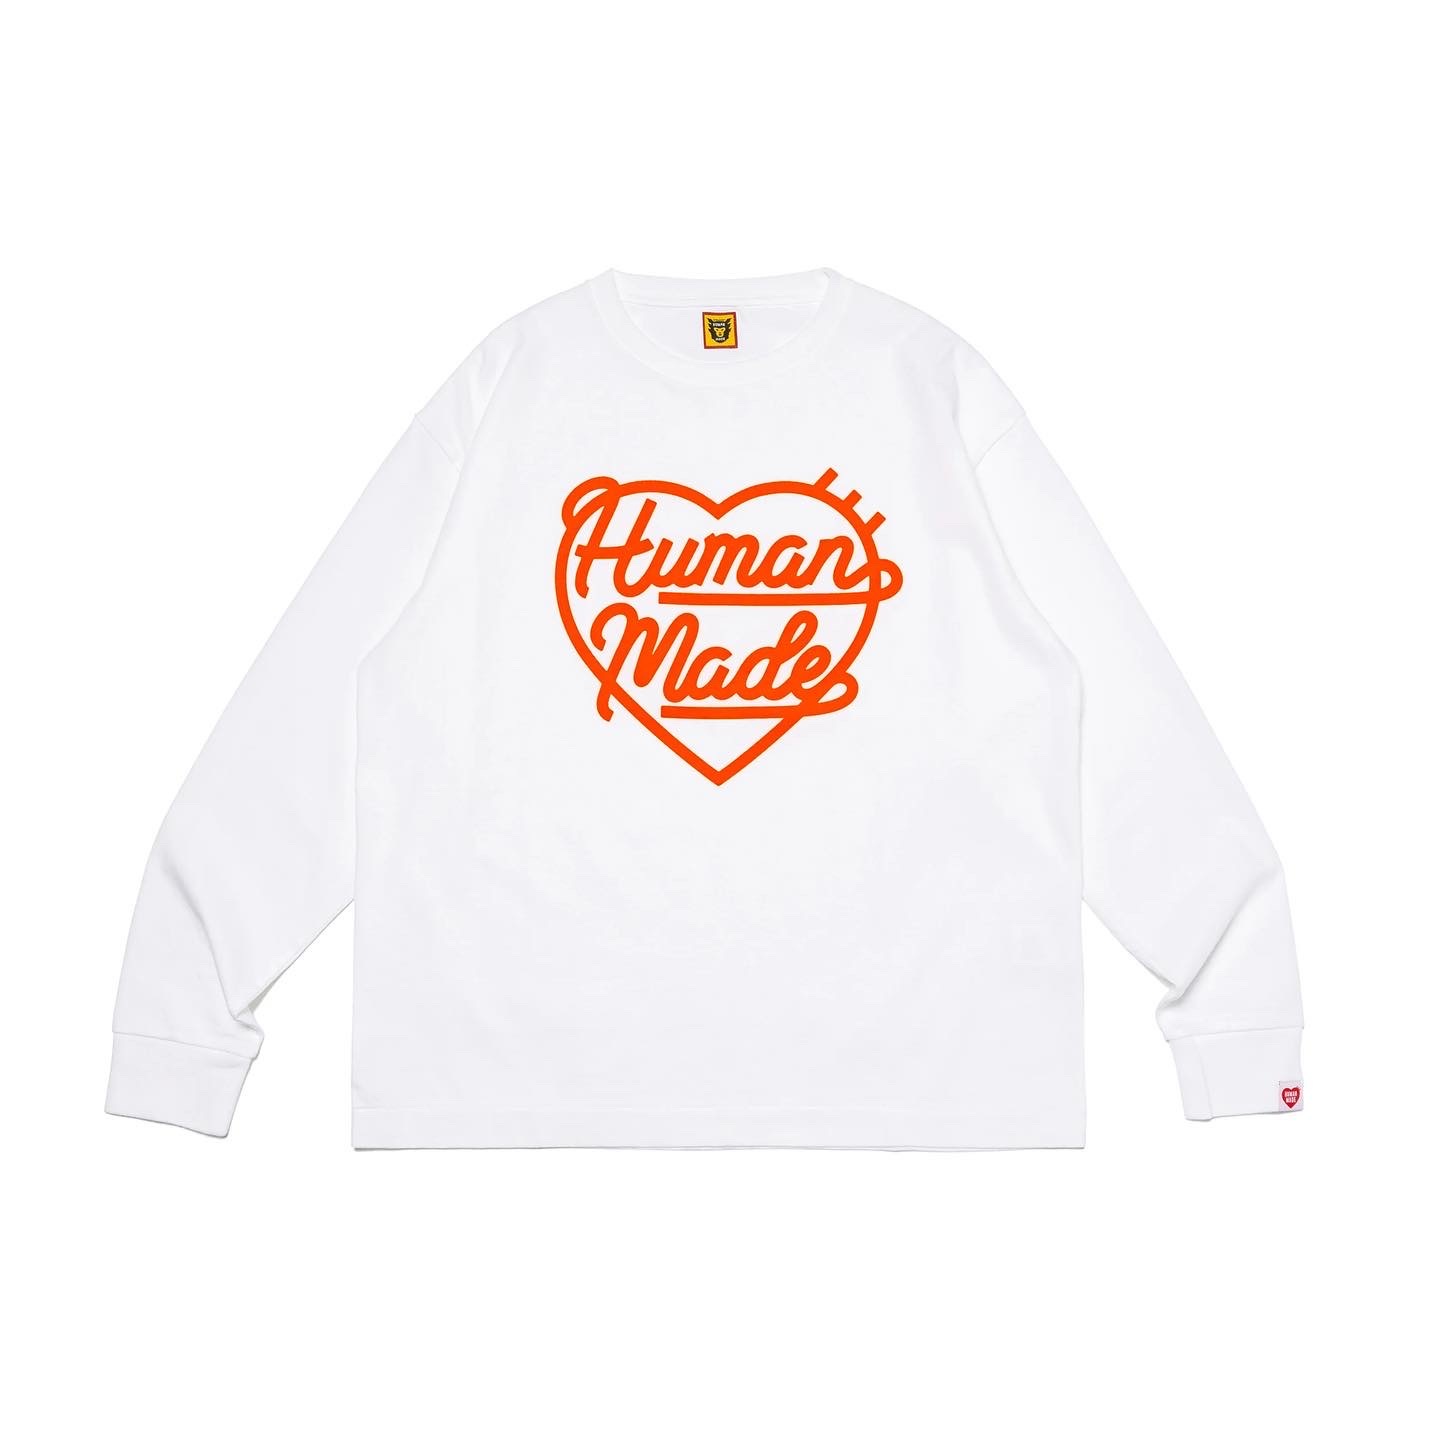 Human Made Heart L/S Tee (3Colors)